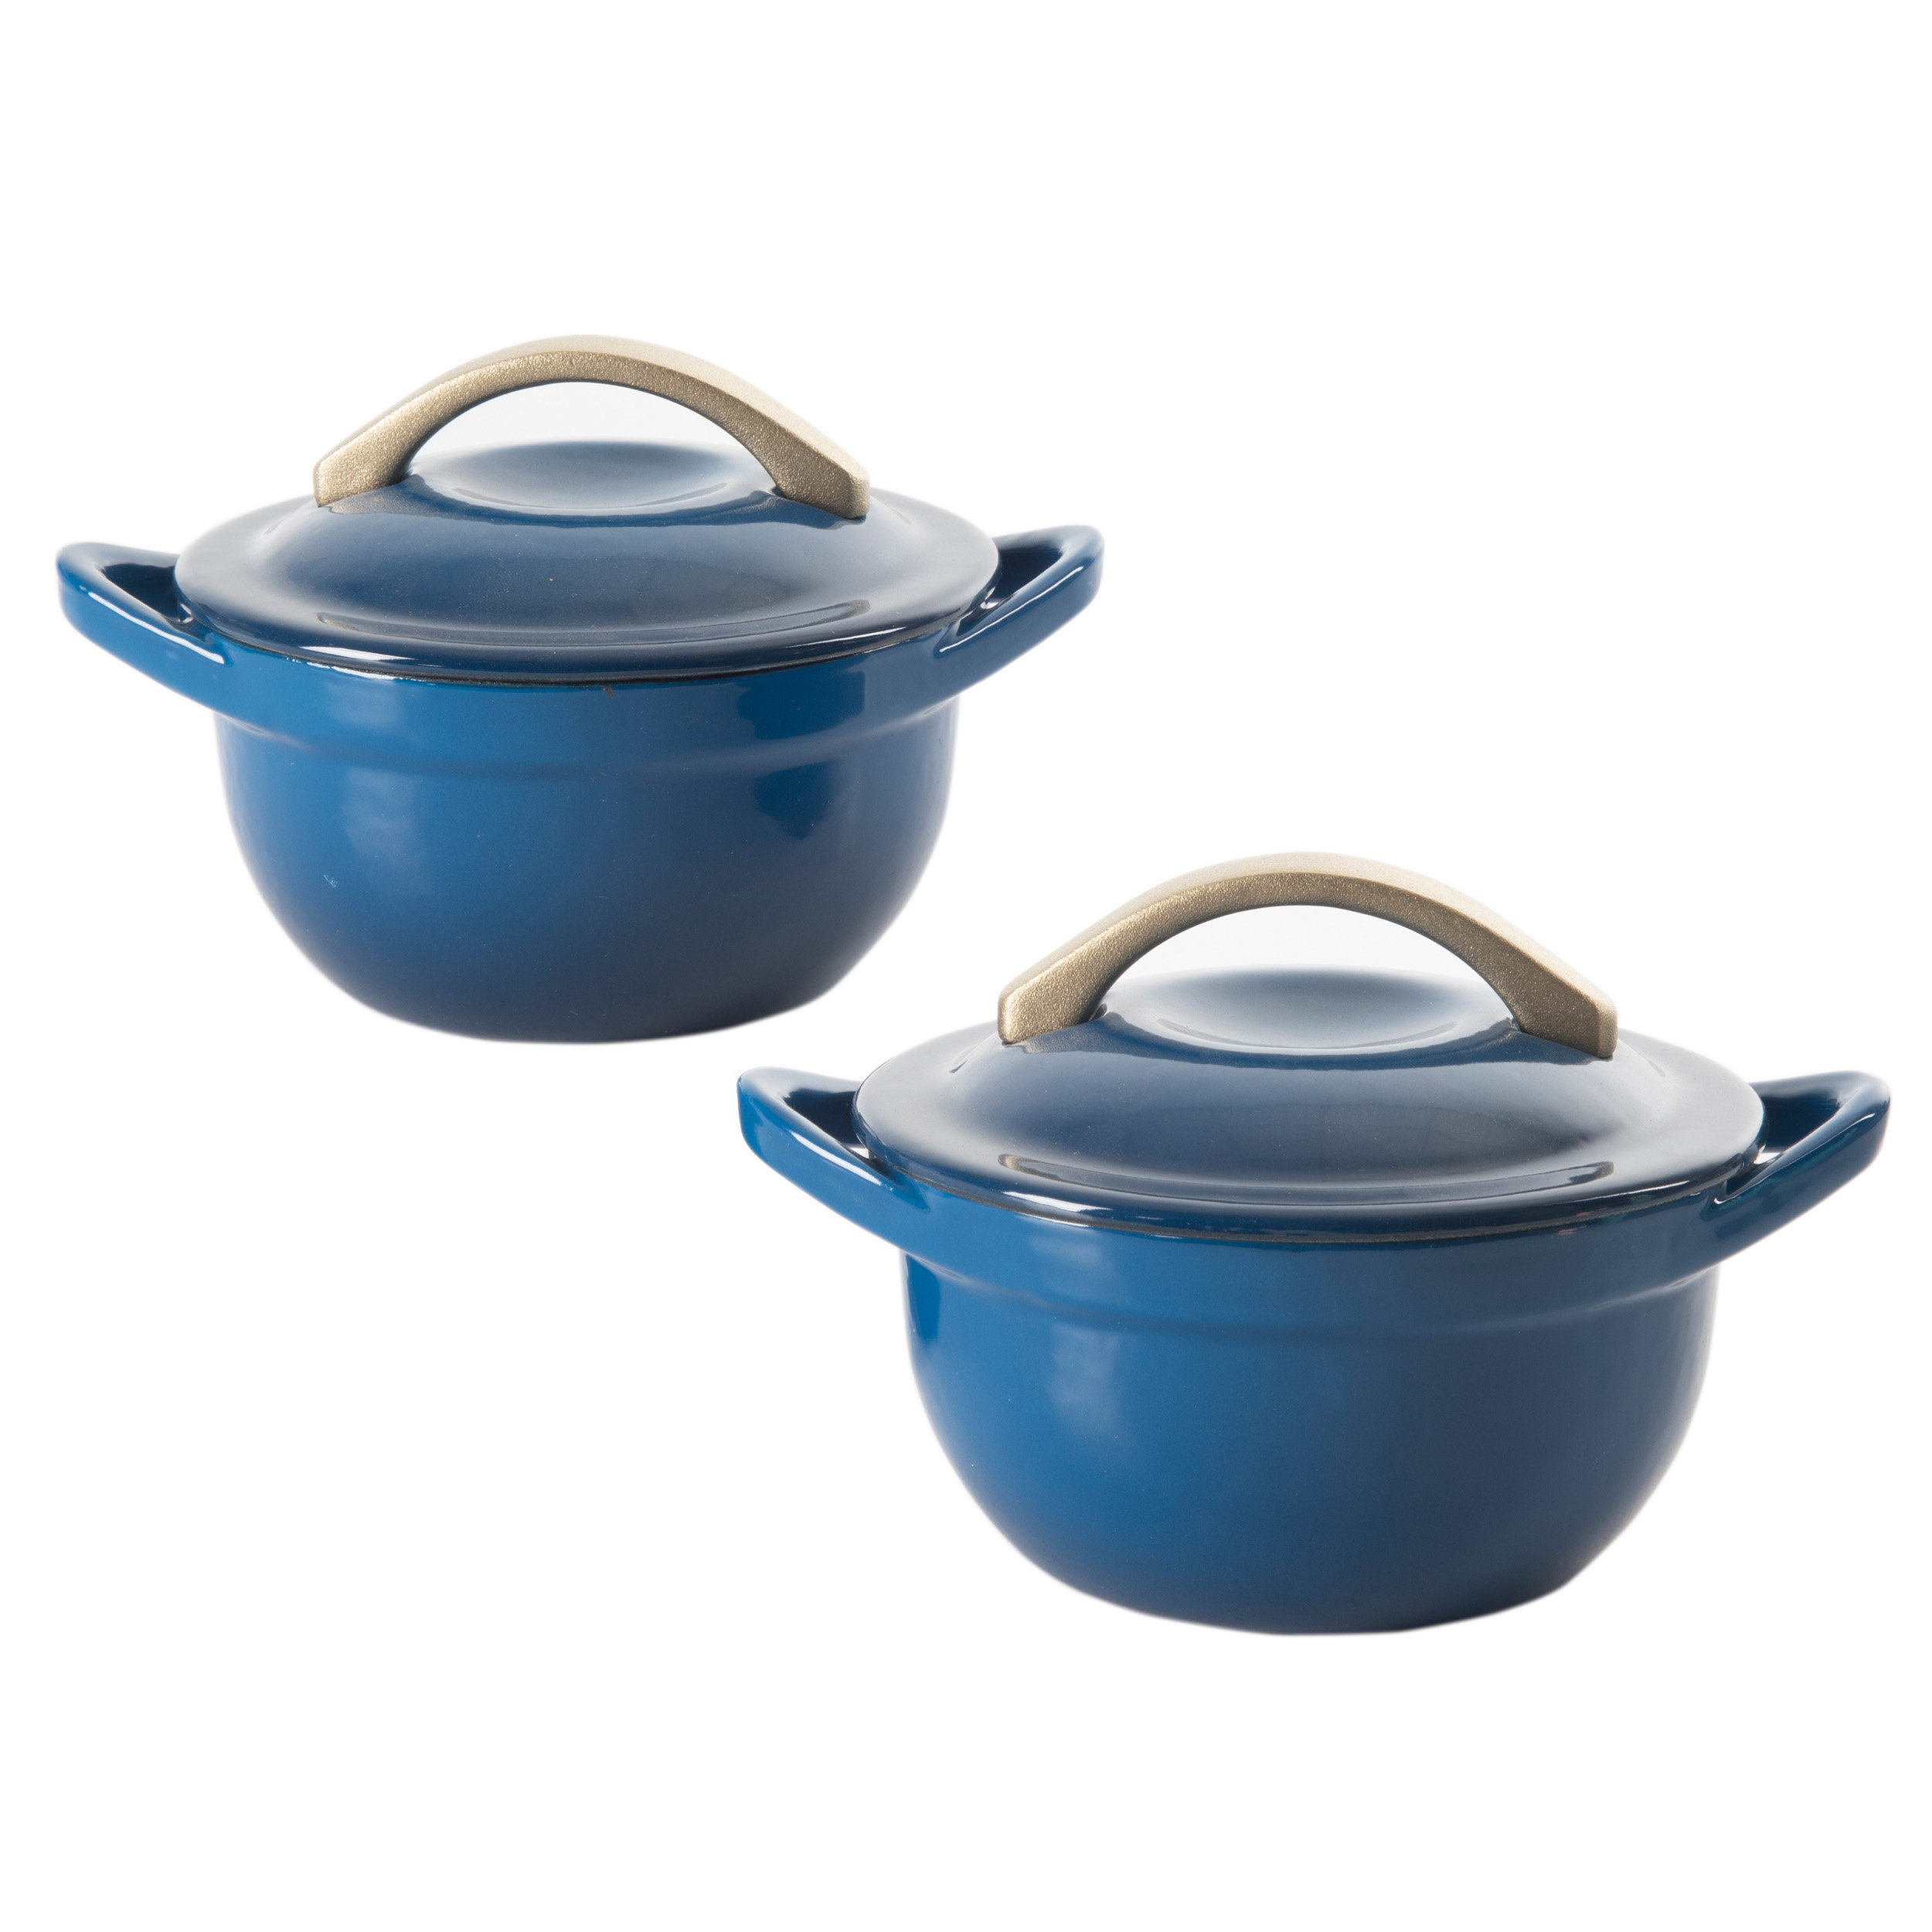 7 PC Enameled Cast Iron Cookware Set - Agave